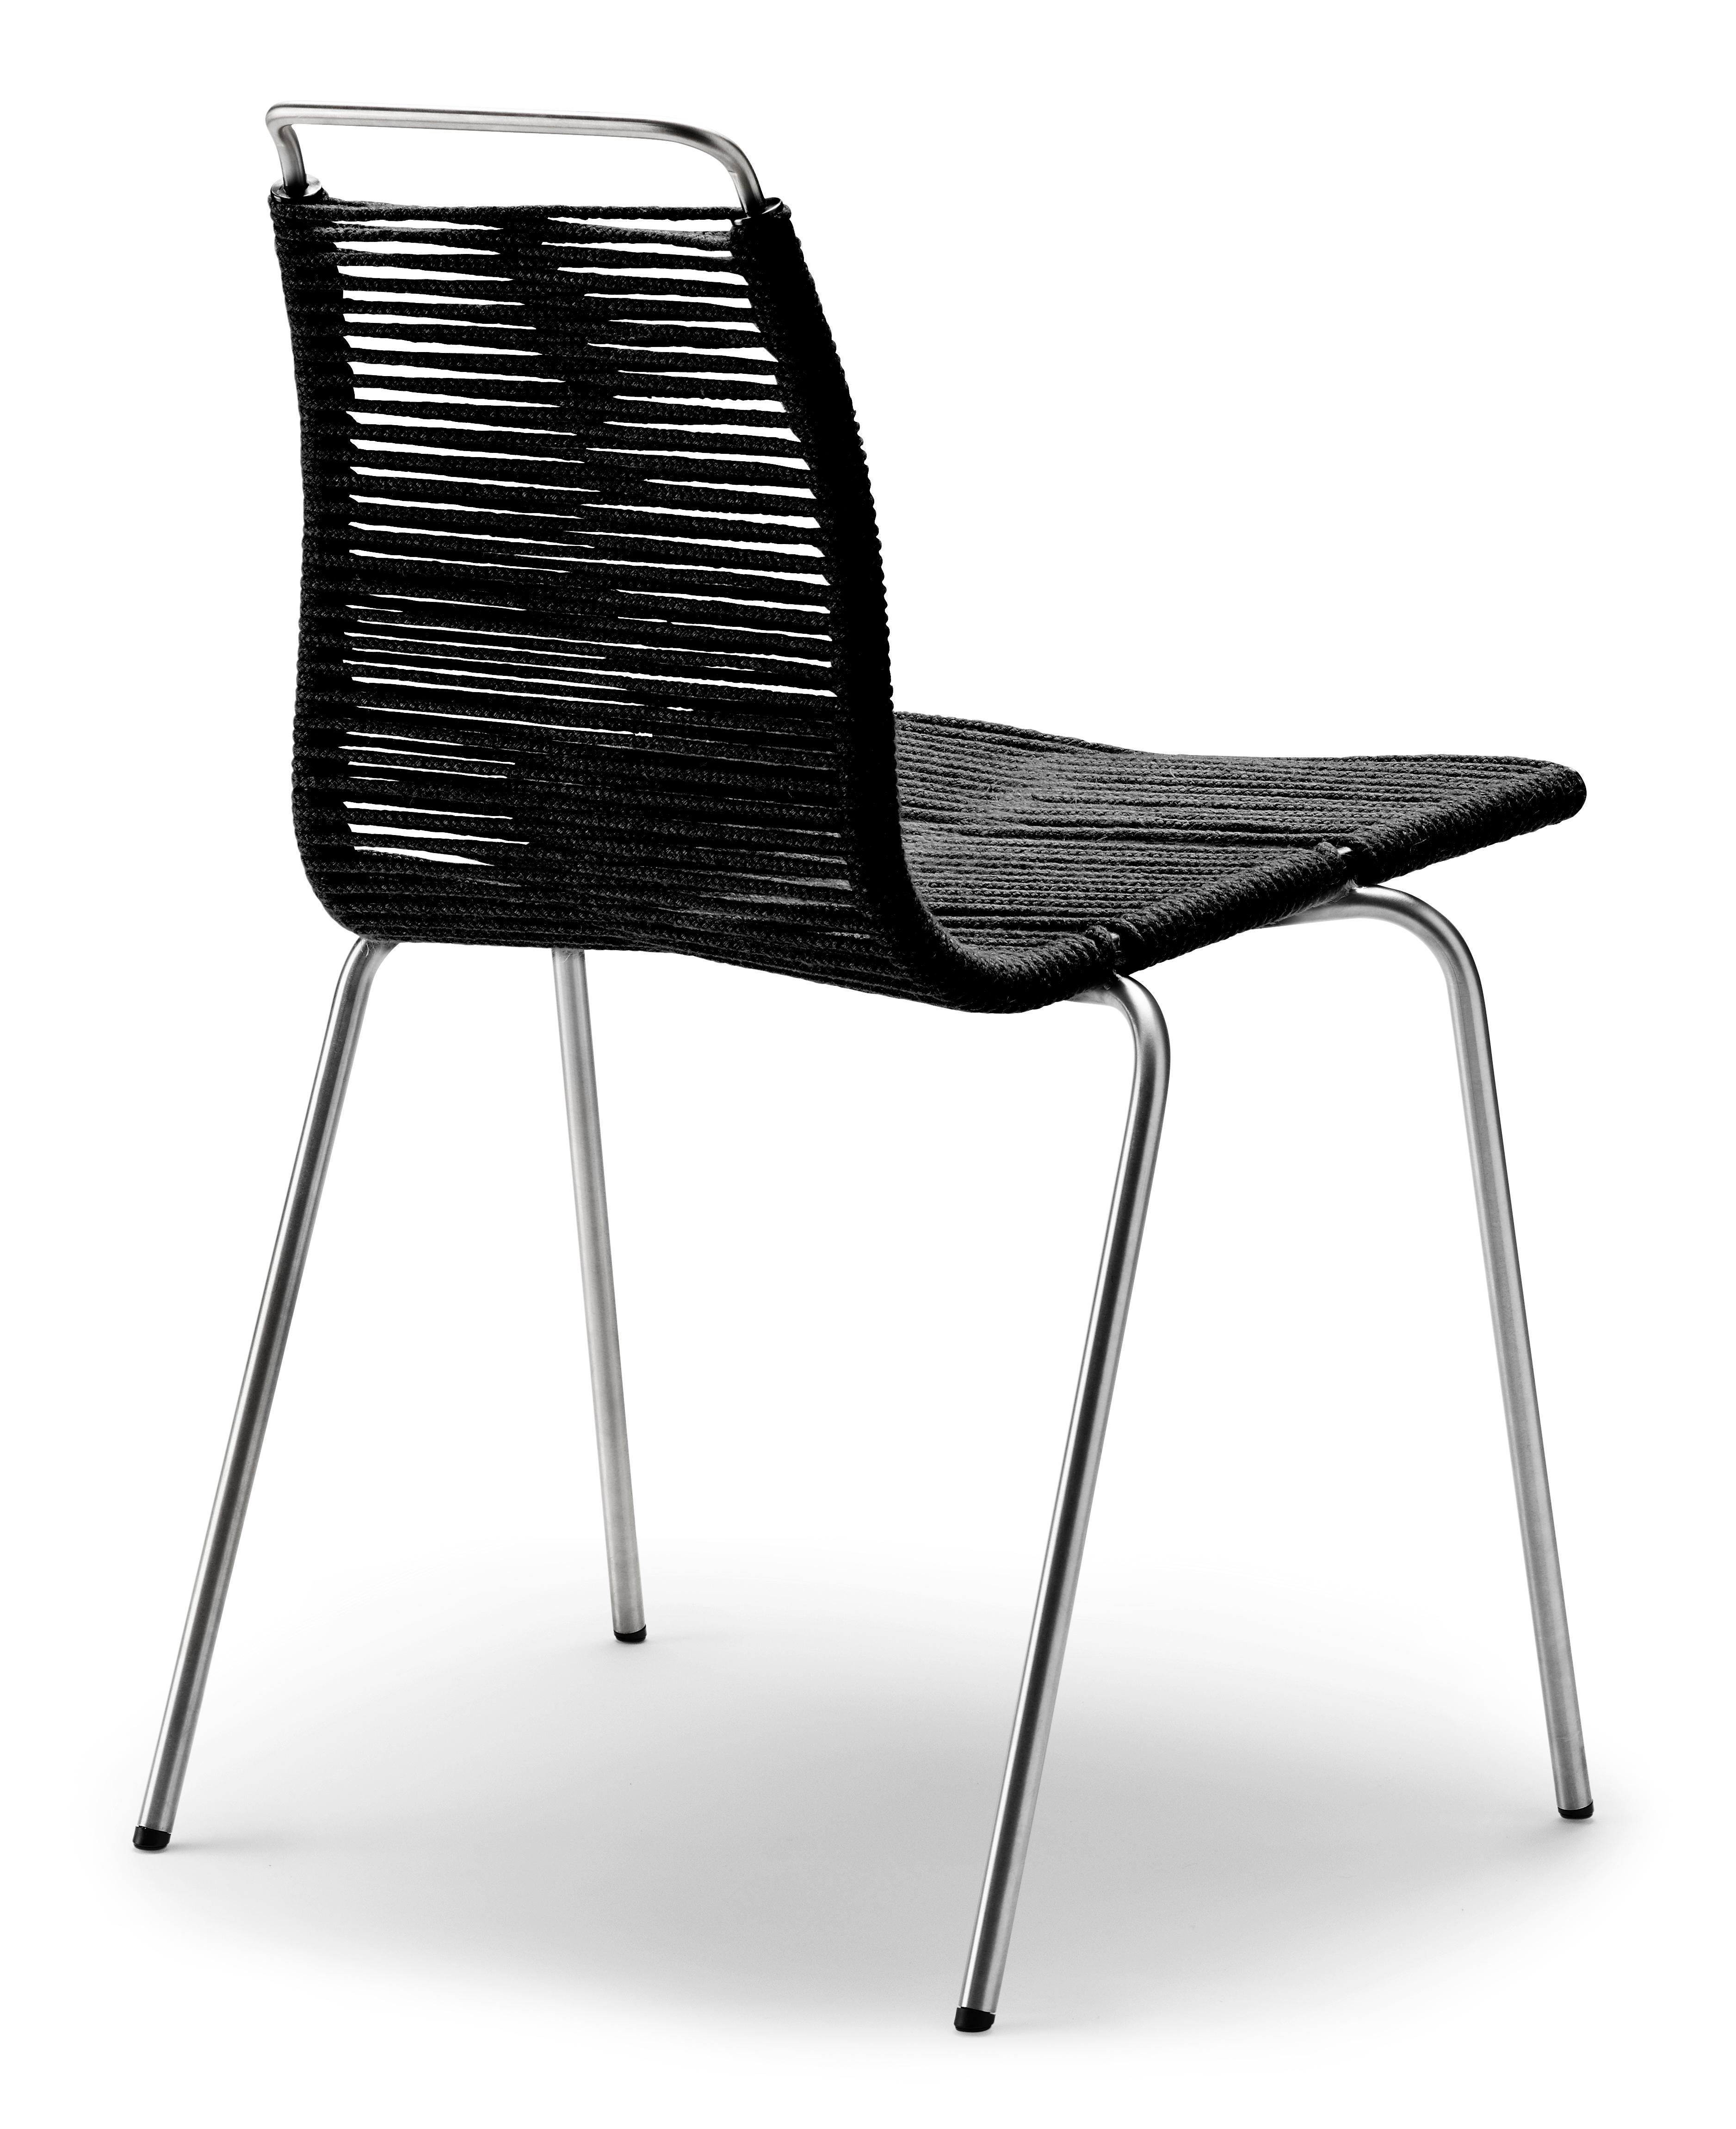 Beige (Woven Flag Halyard Natural-Black) PK1 Dining Chair in Stainless Steel Base by Poul Kjærholm 3